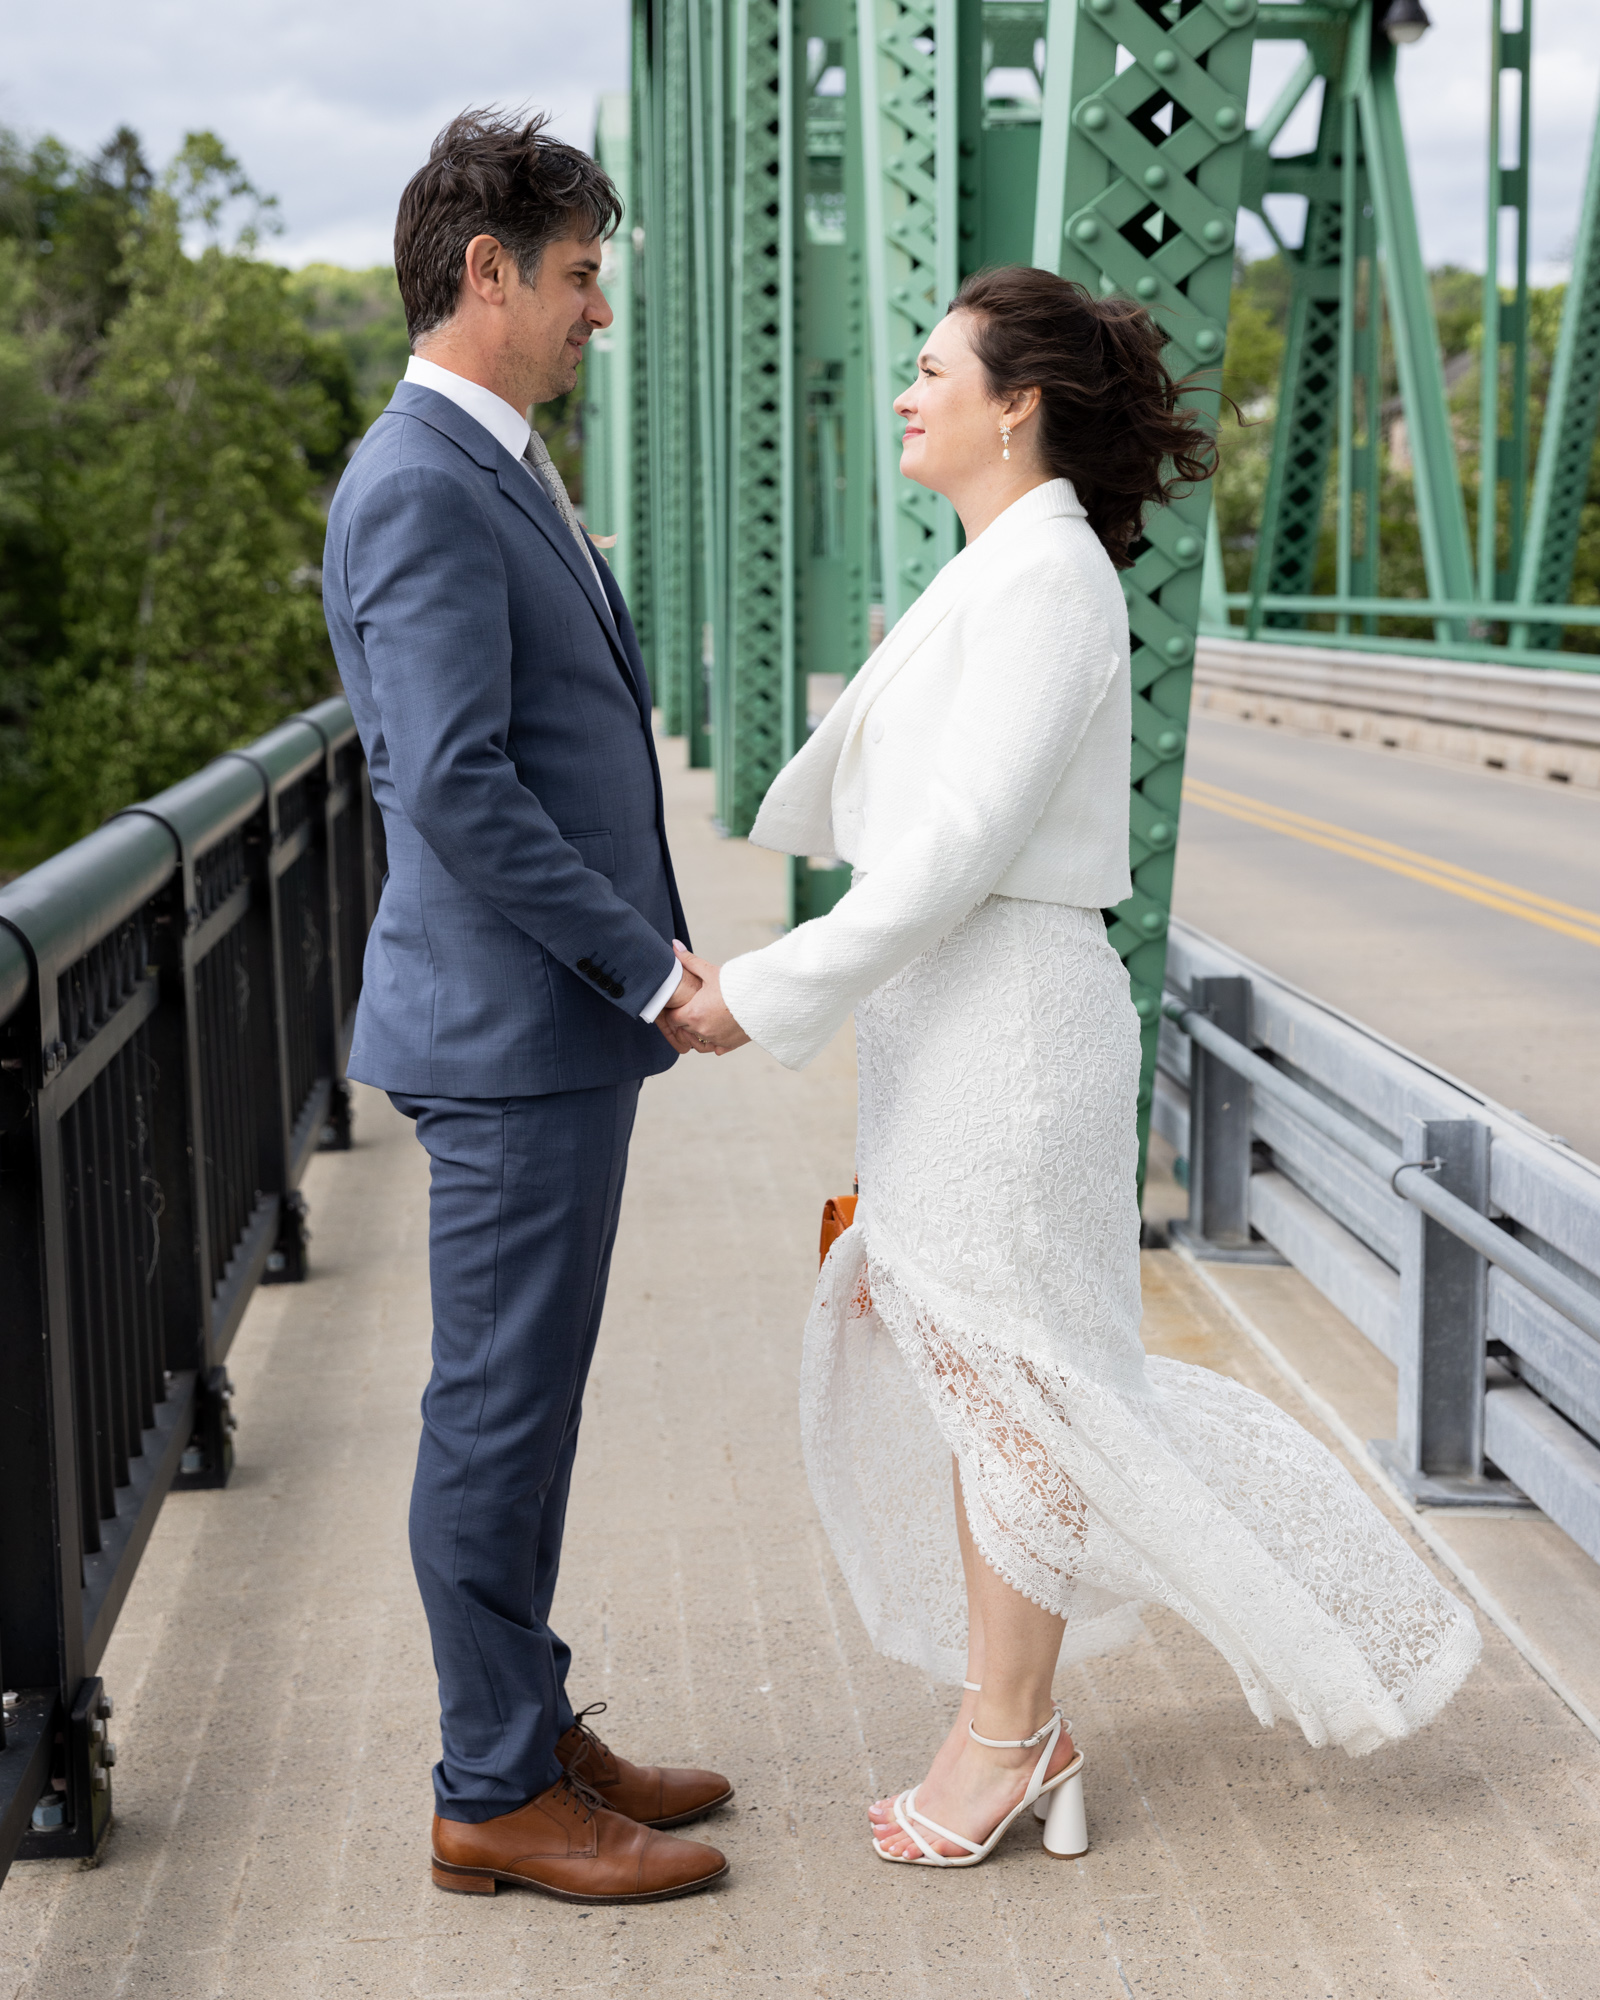 Stylish couple facing each other on the Milford Bridge in Bucks County, PA. The wind is blowing the brides hair and gown while they hold hands and look at each other